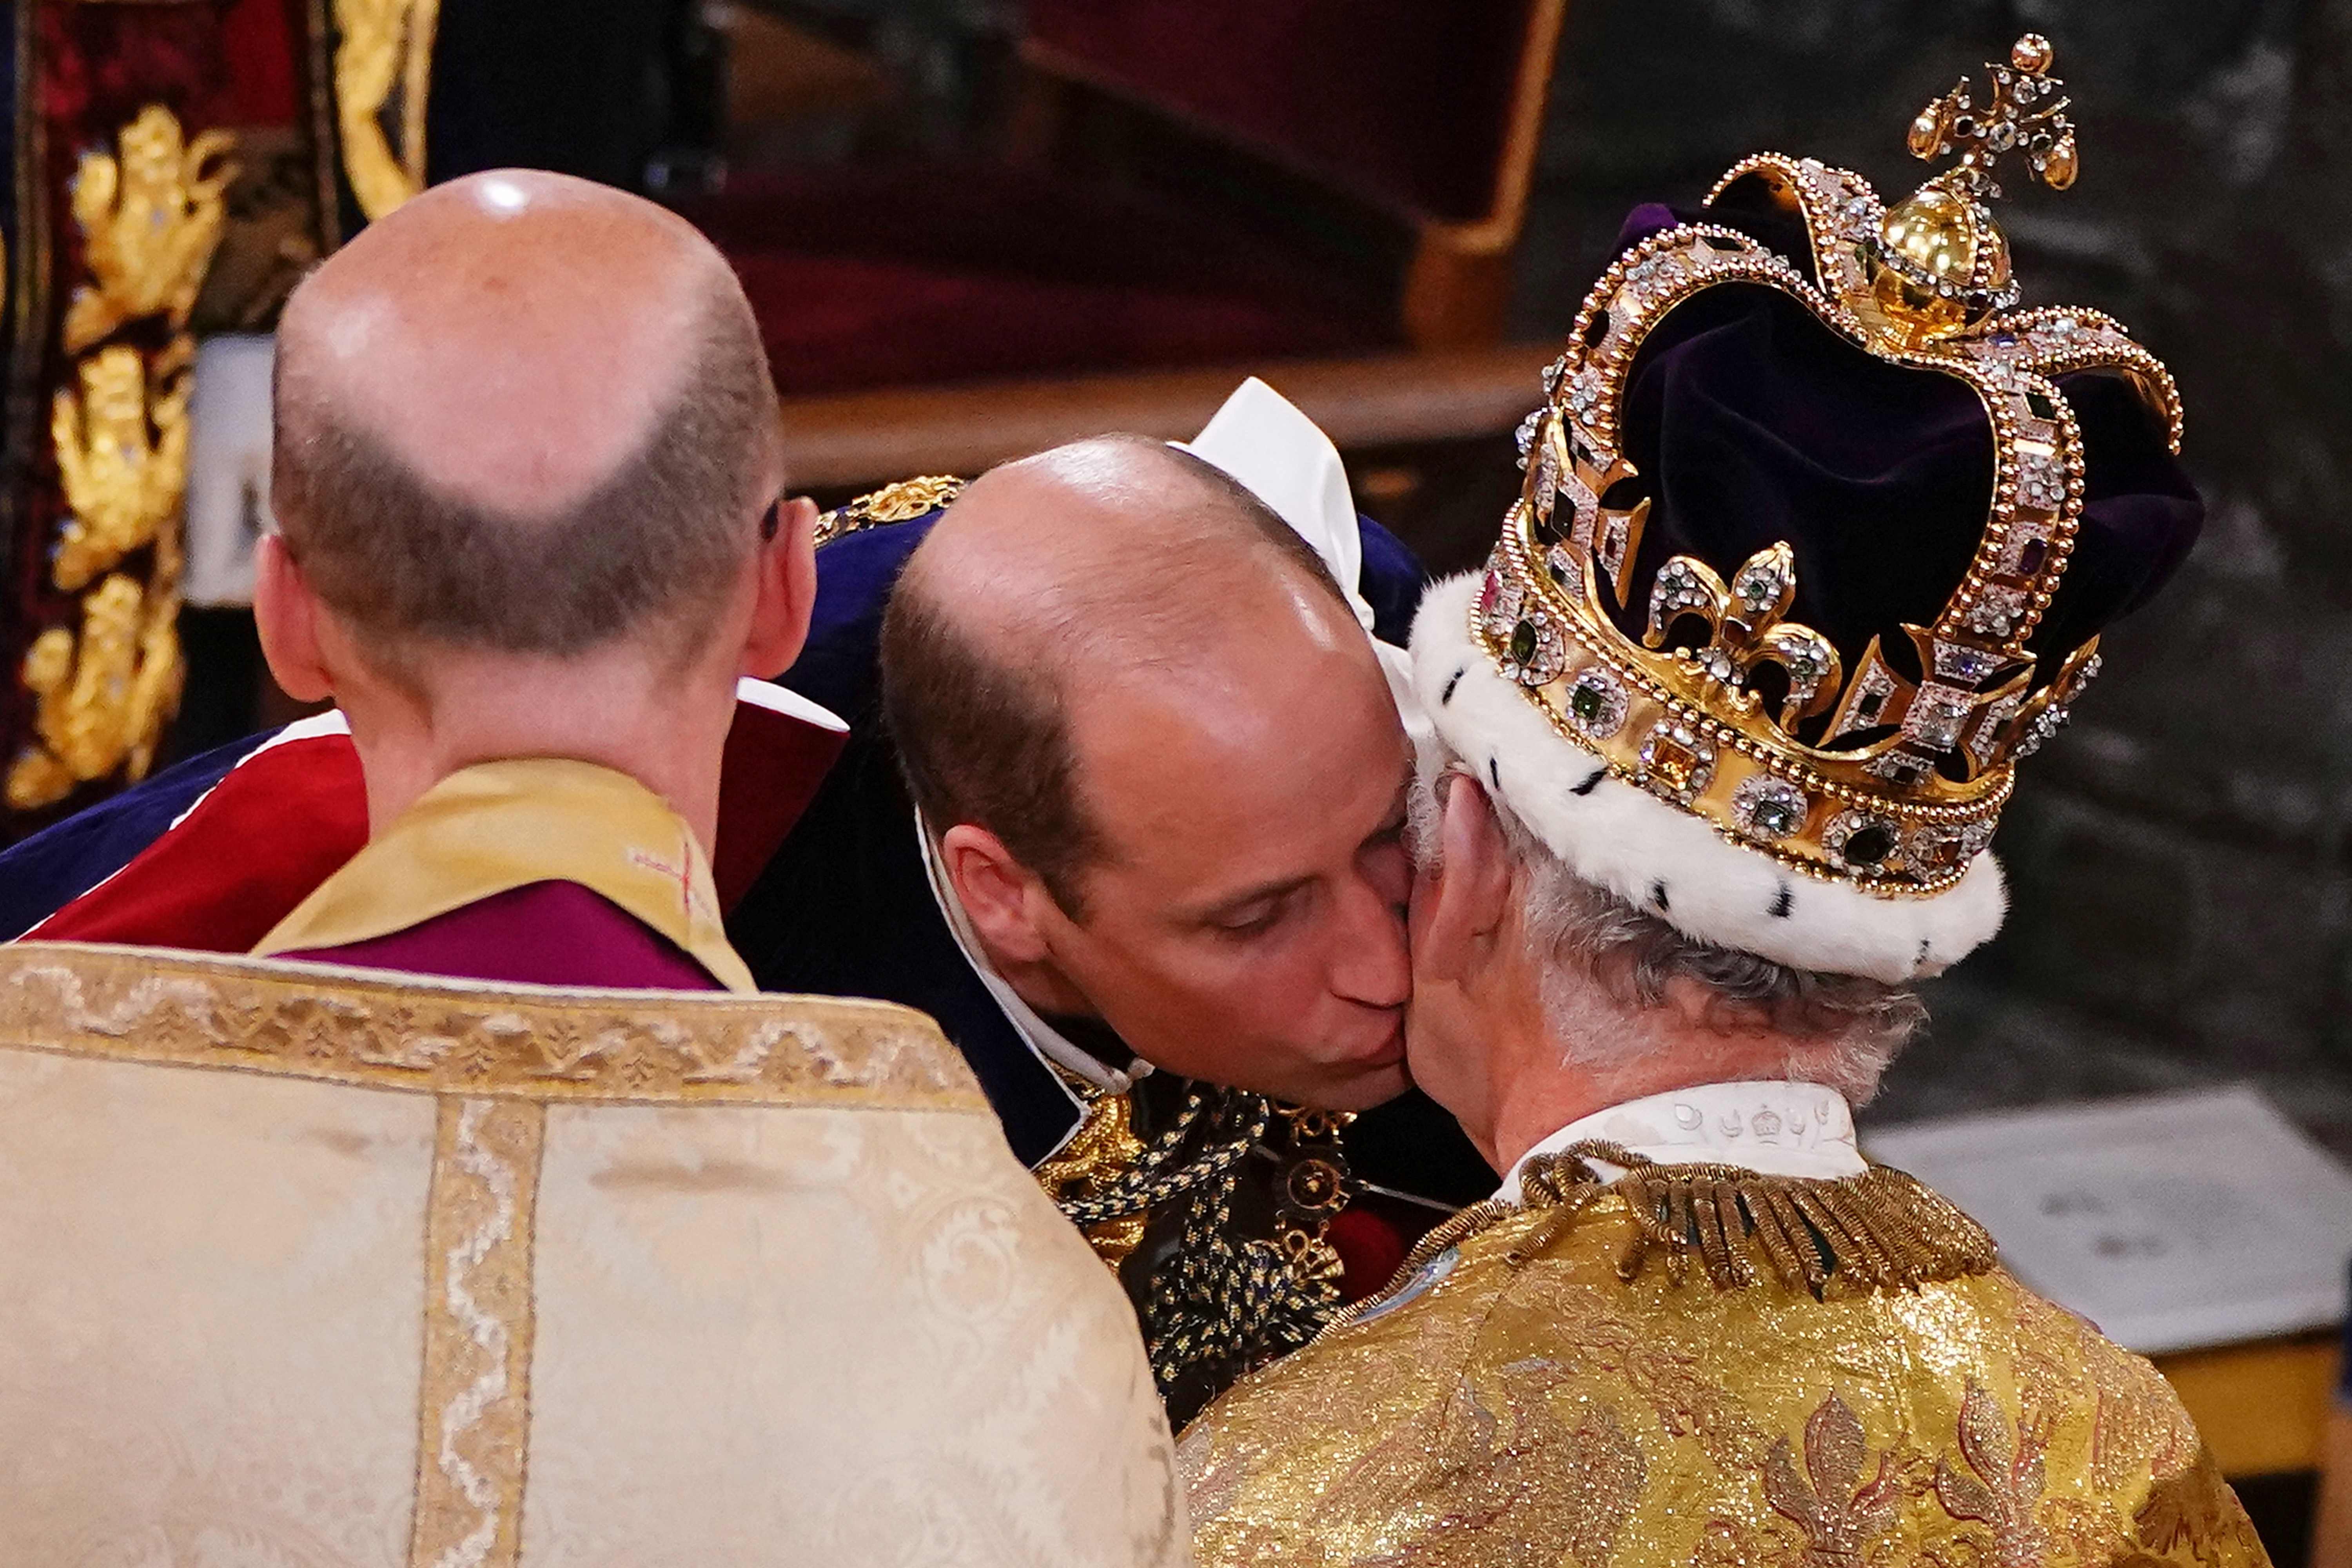 Charles looked emotional as his son, William, kissed him on the cheek